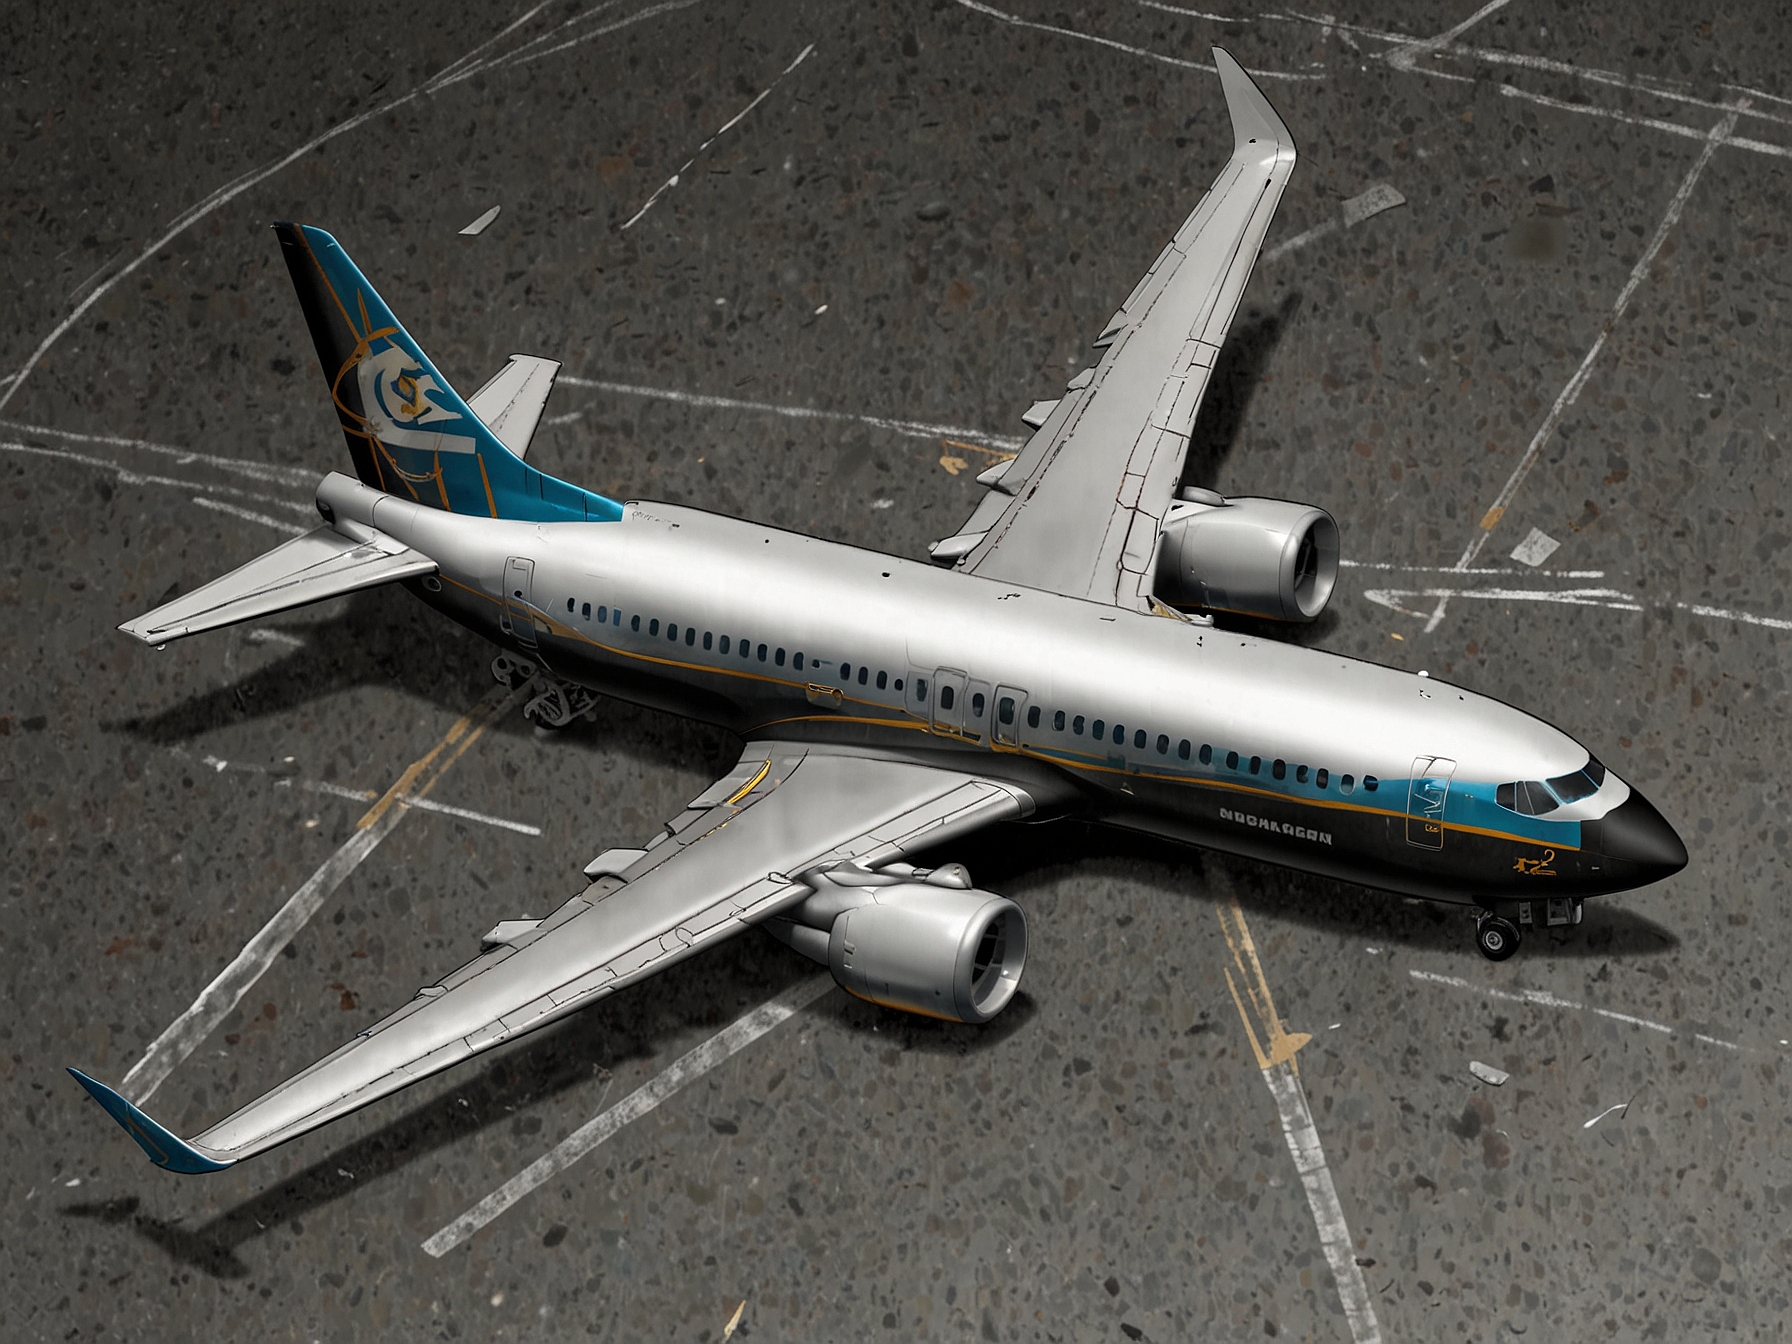 Aerial view of a grounded Boeing 737 Max jet, emphasizing the global grounding of the fleet following the two fatal crashes linked to the MCAS system failures.